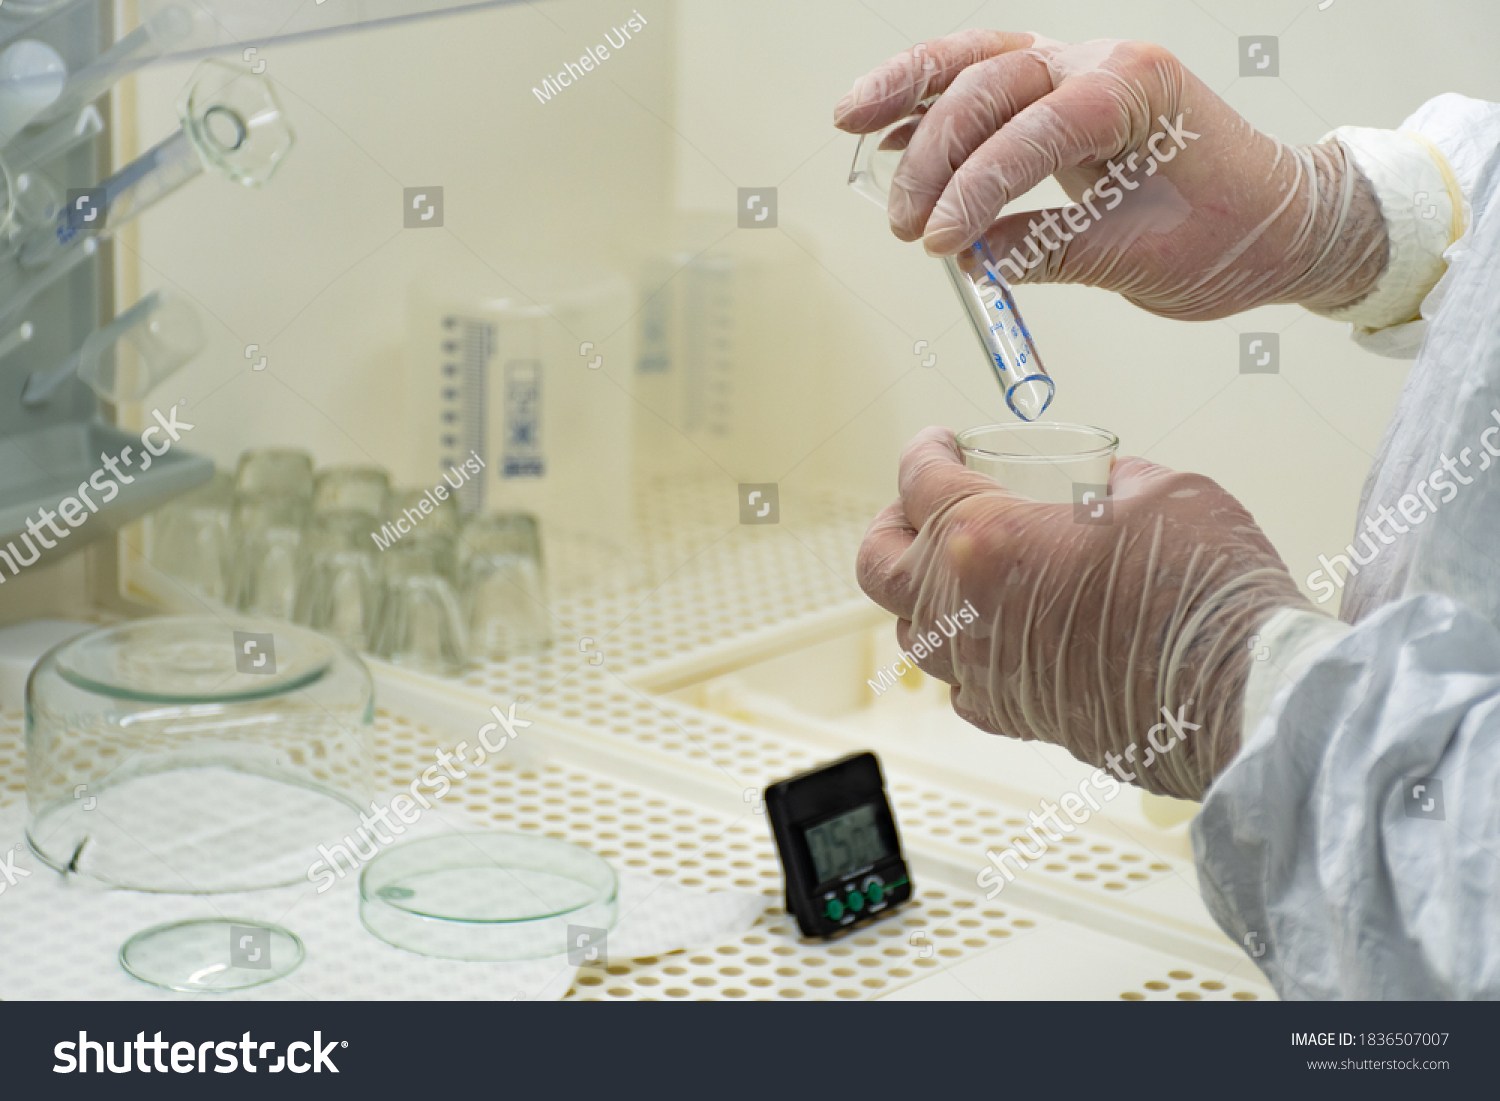 Scientist in protective white coat, mask and gloves analyzes a virus or bacteria sample in a laboratory with vials, glass flasks and chemicals. Medical lab test, new vaccine research or development #1836507007